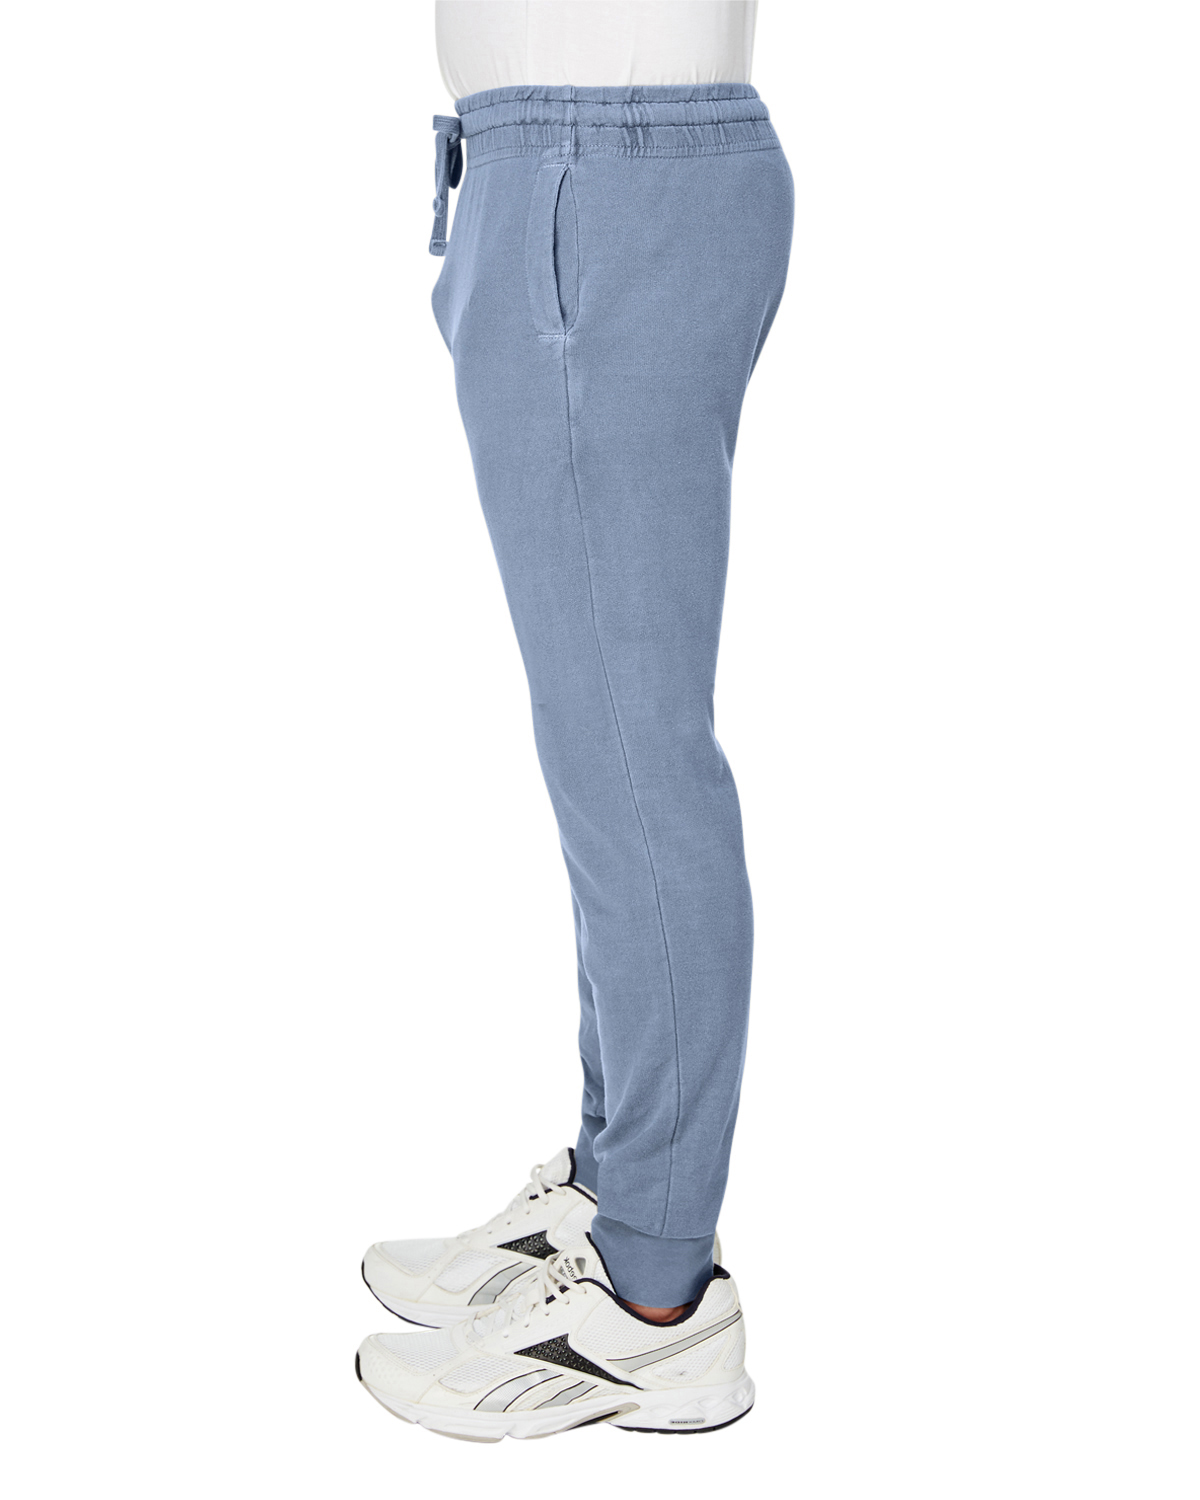 -Cotton Classic Sweatpants Comfort Colors Adult French Terry Jogger Pants 1539 